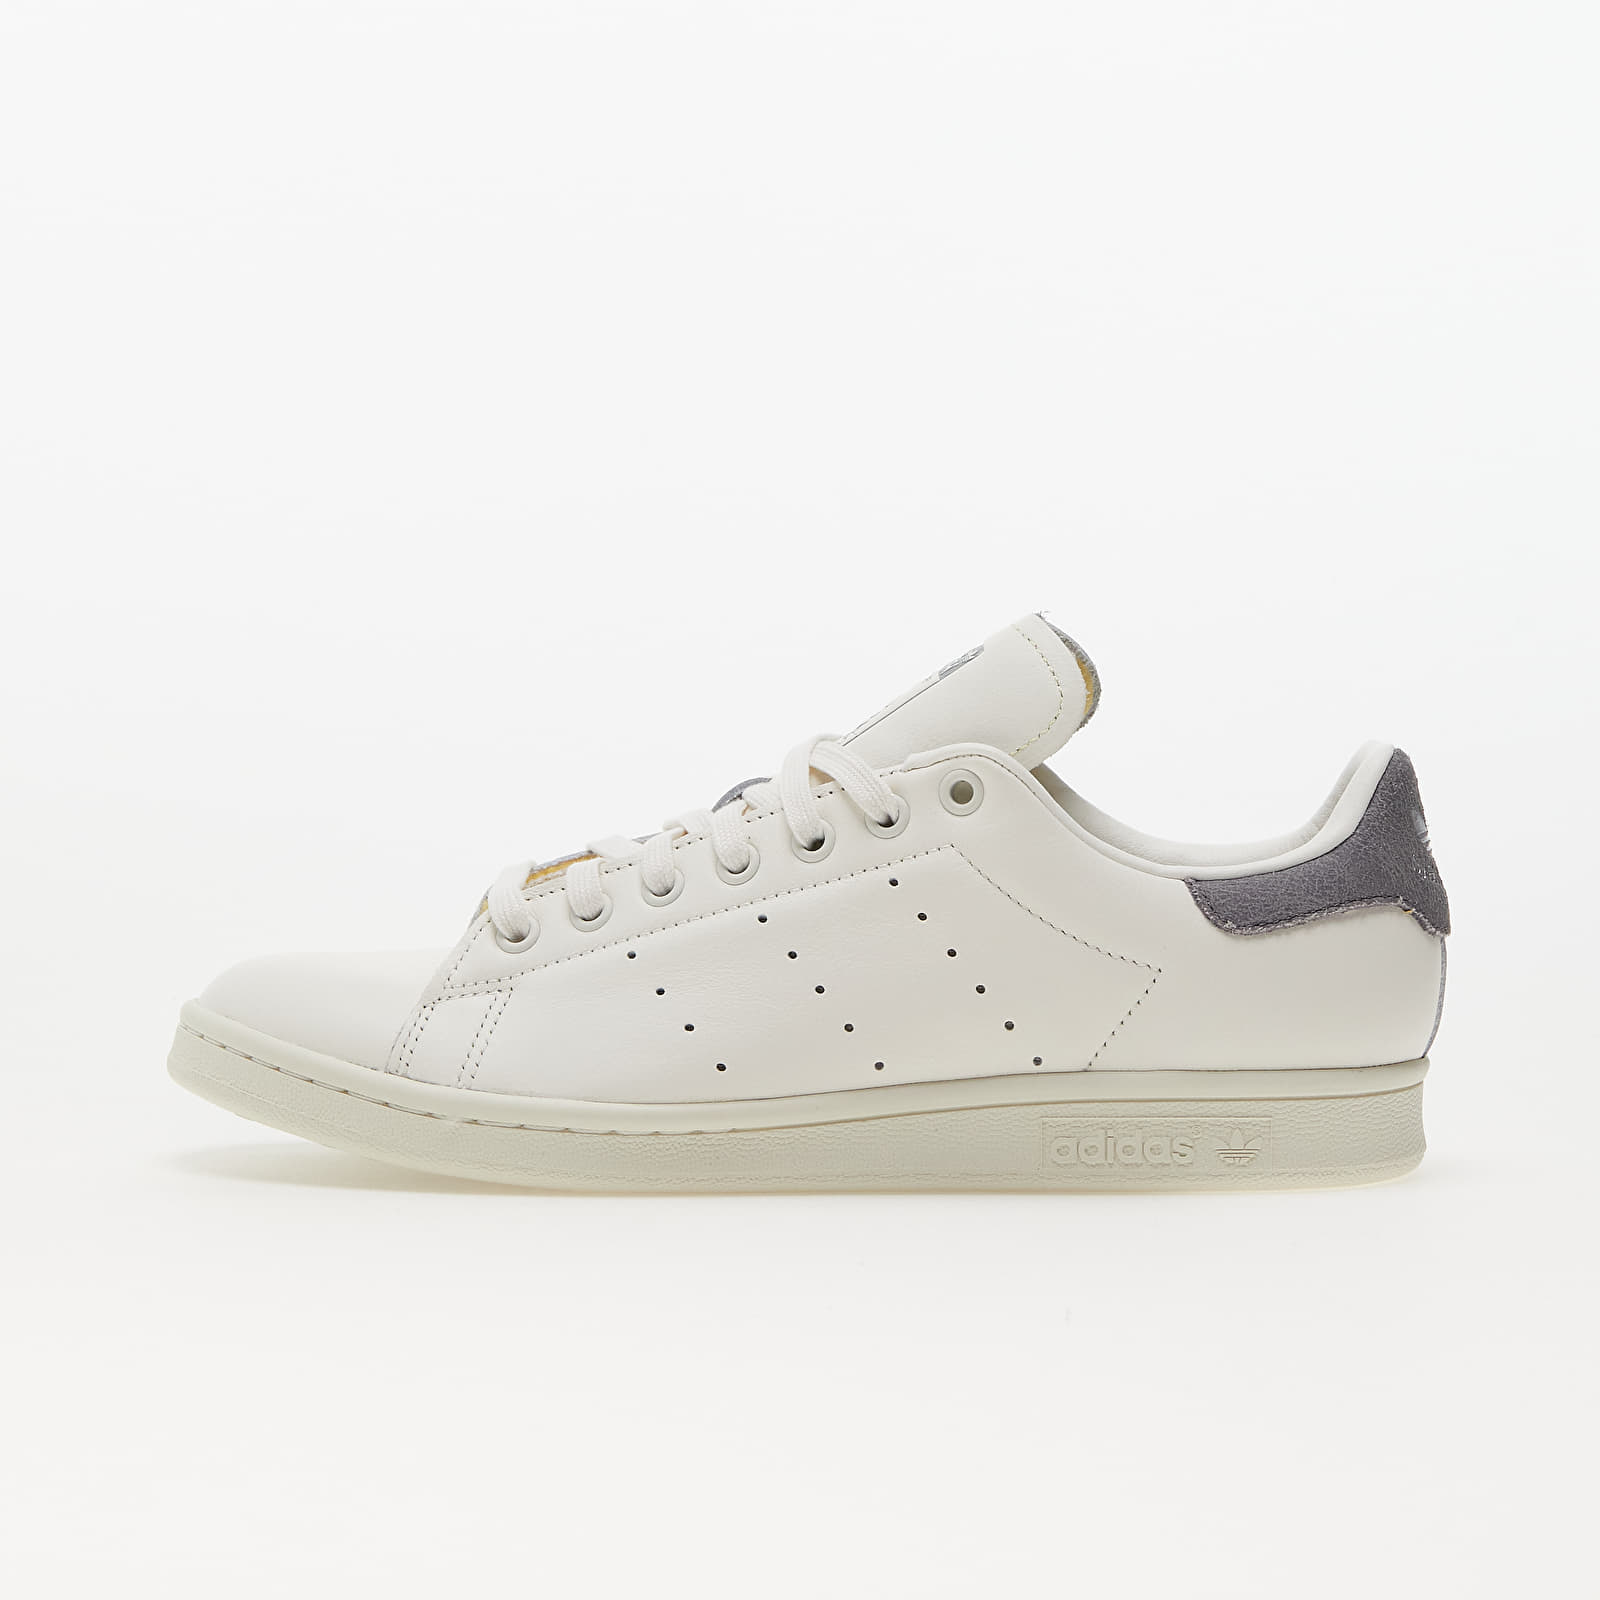 Men's sneakers and shoes adidas Originals Stan Smith Core White/ Off White/ PANTON